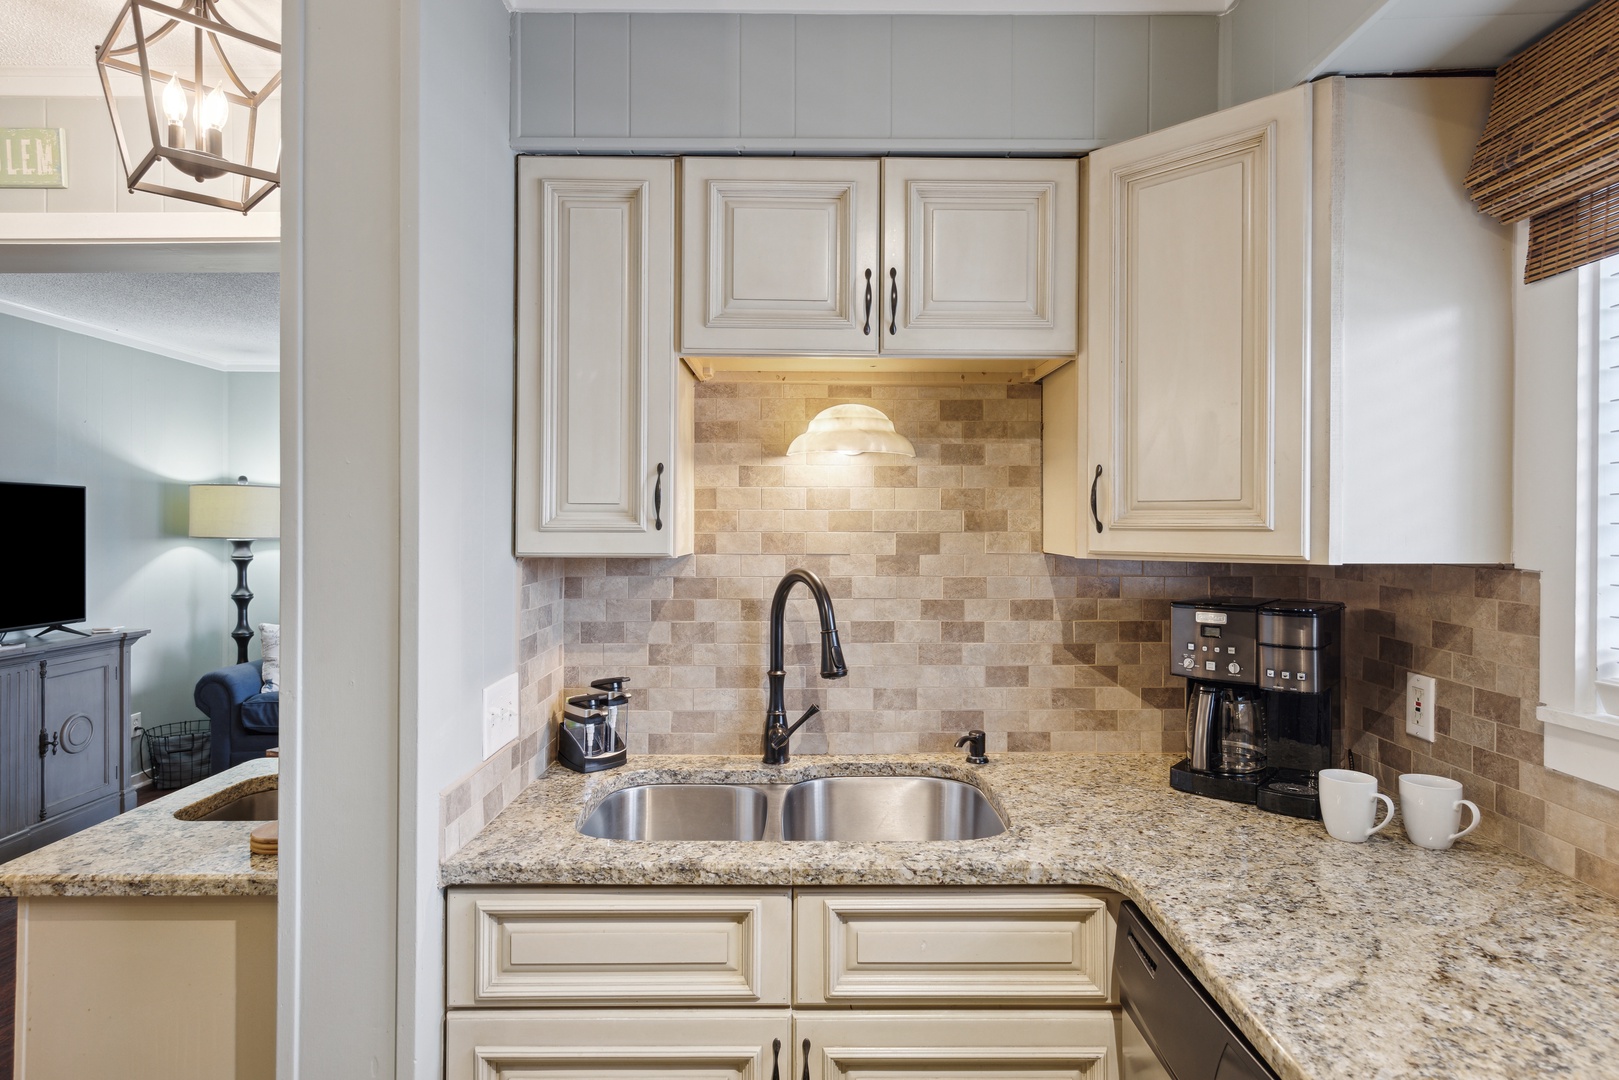 The elegant kitchen offers ample space & all the comforts of home